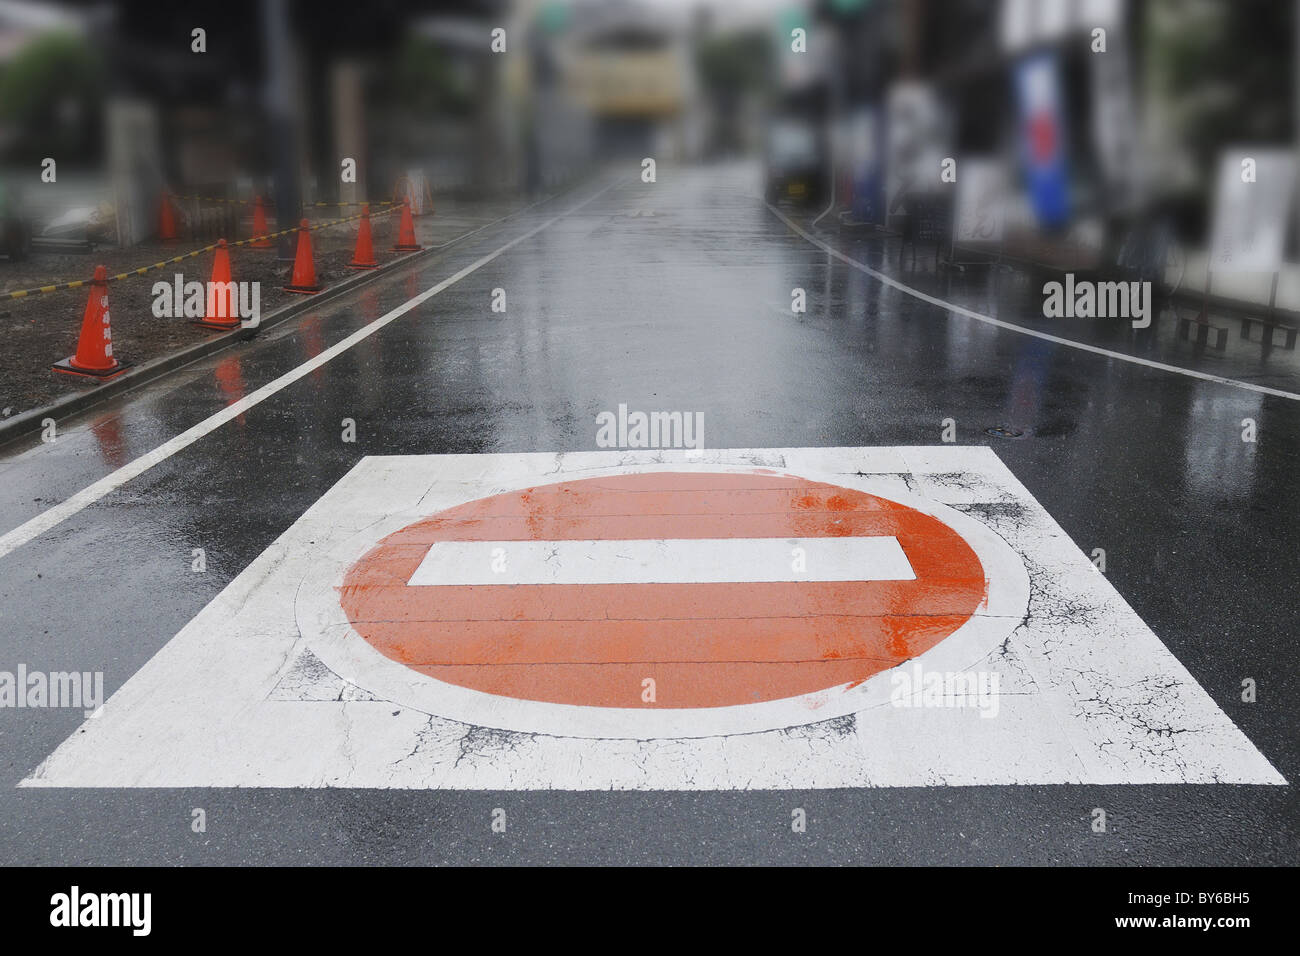 giant stop sign on the road Stock Photo